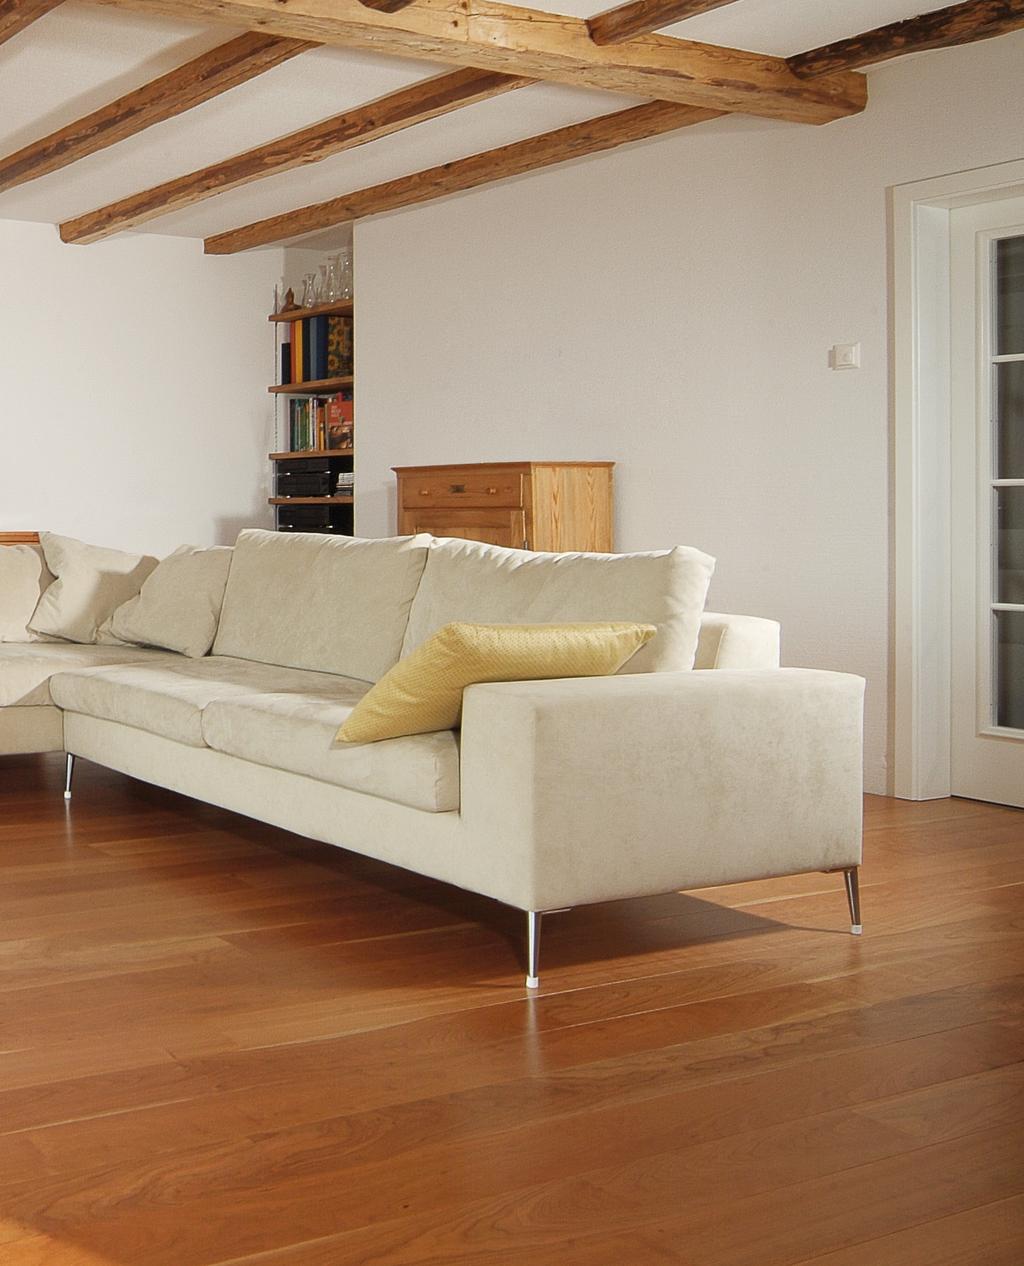 FASCINATING RED Solid wood flooring Cherry